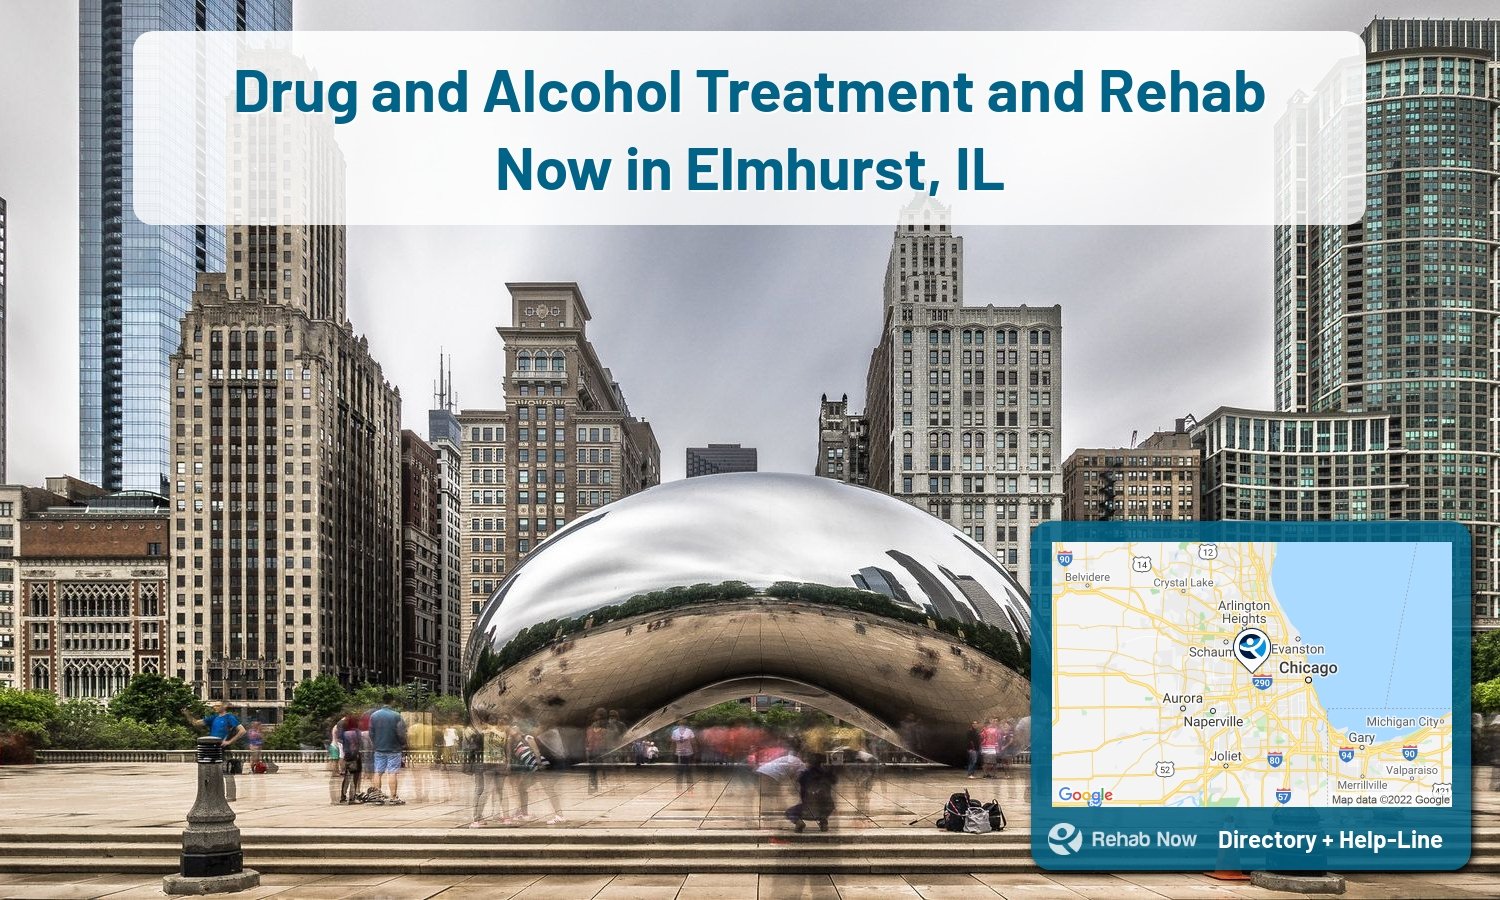 View options, availability, treatment methods, and more, for drug rehab and alcohol treatment in Elmhurst, Illinois